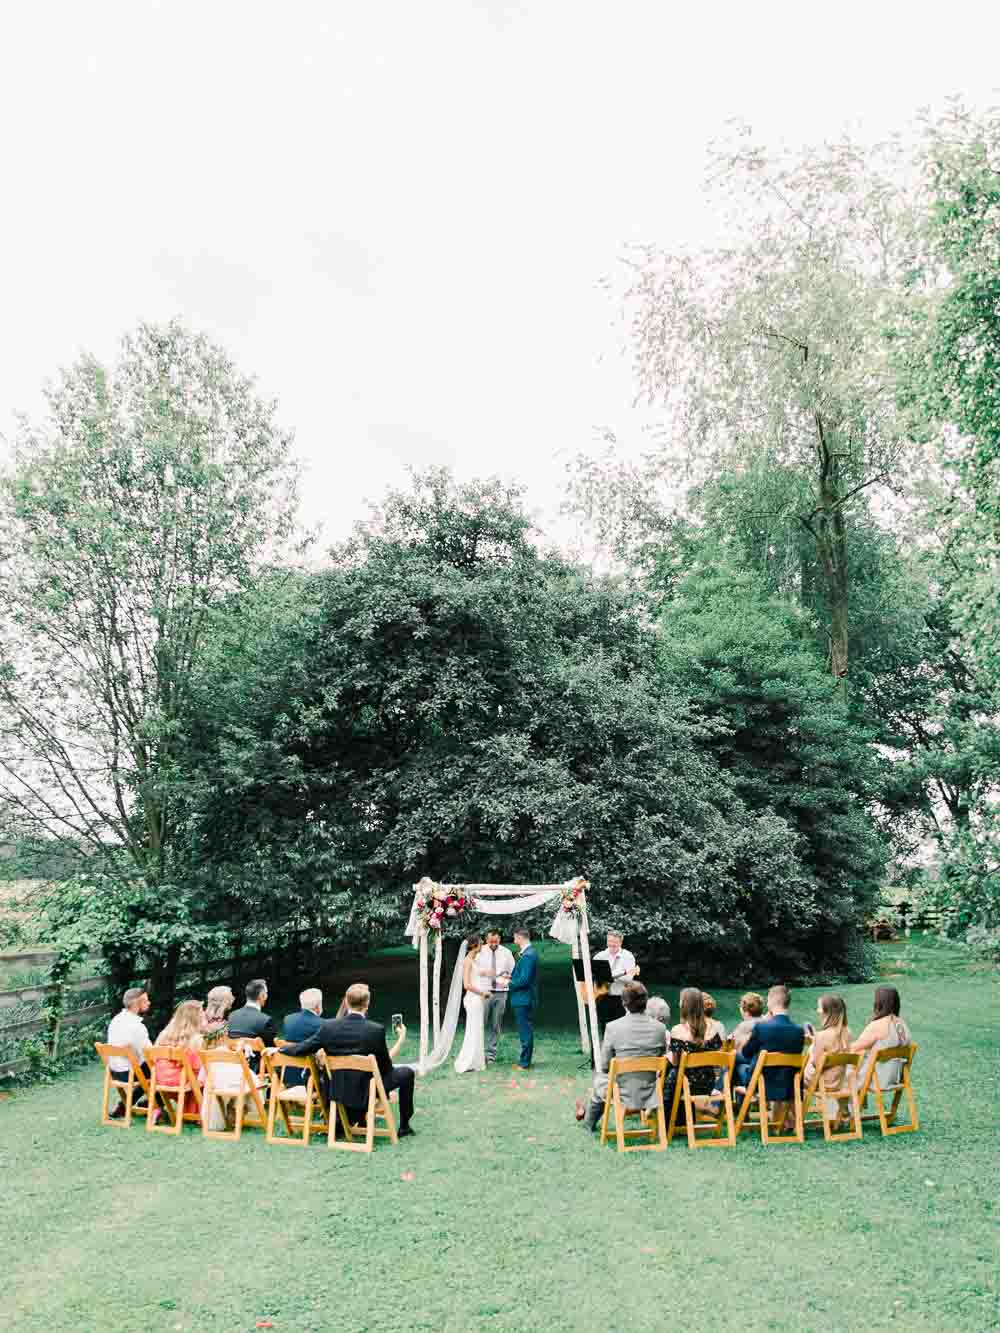 ceremony during an intimate backyard wedding in cleveland Ohio